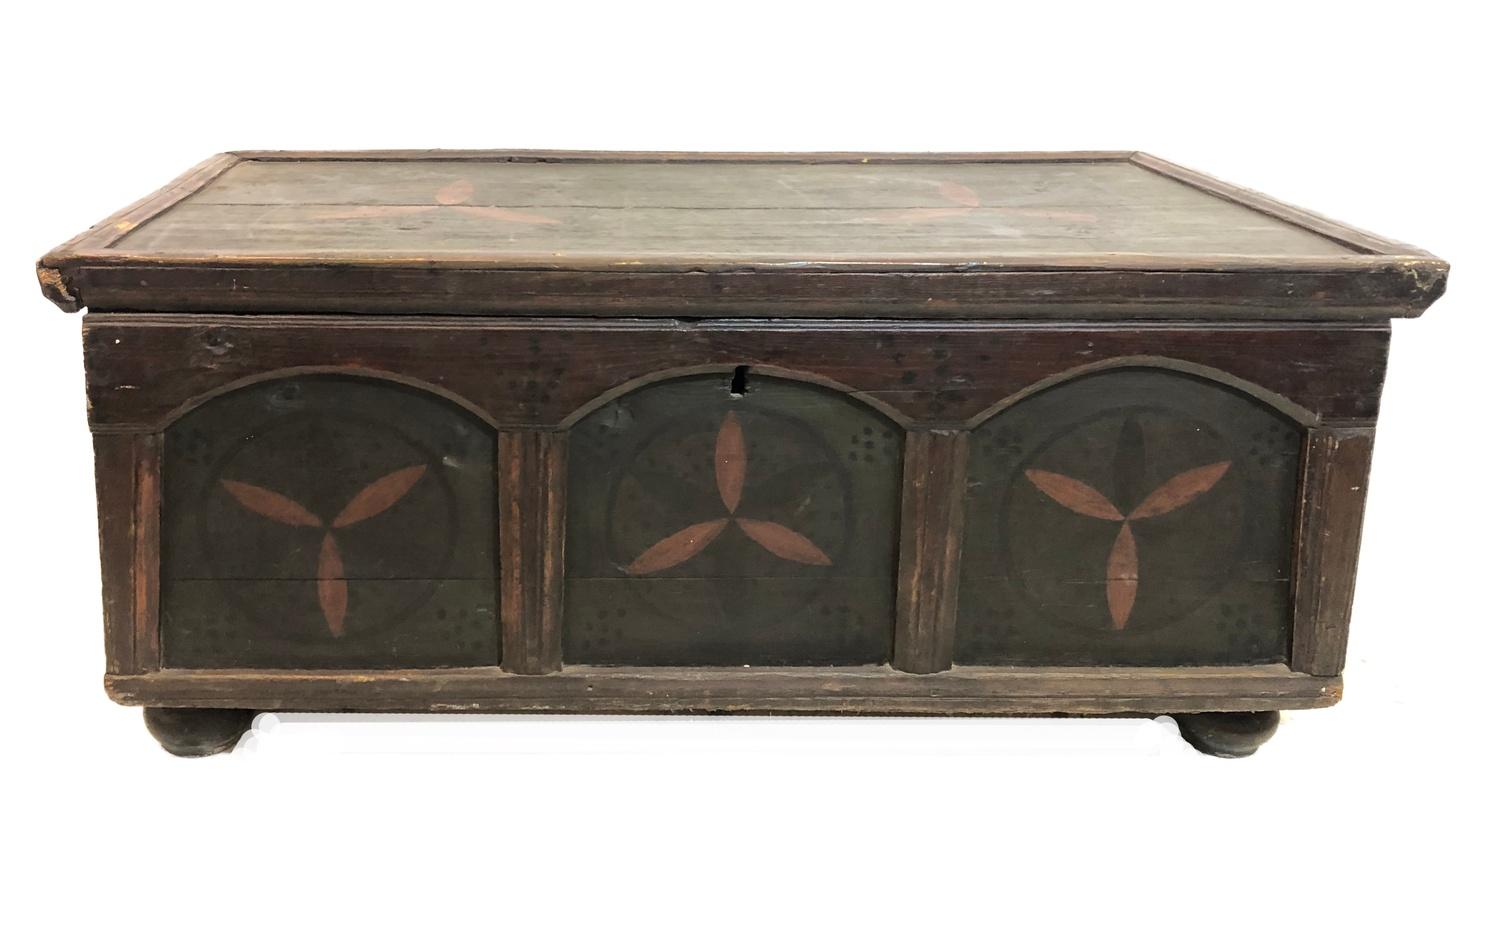 Large Late C18th/Early C19th Ukrainian Painted Pine Coffer marked with propeller symbols to ward off